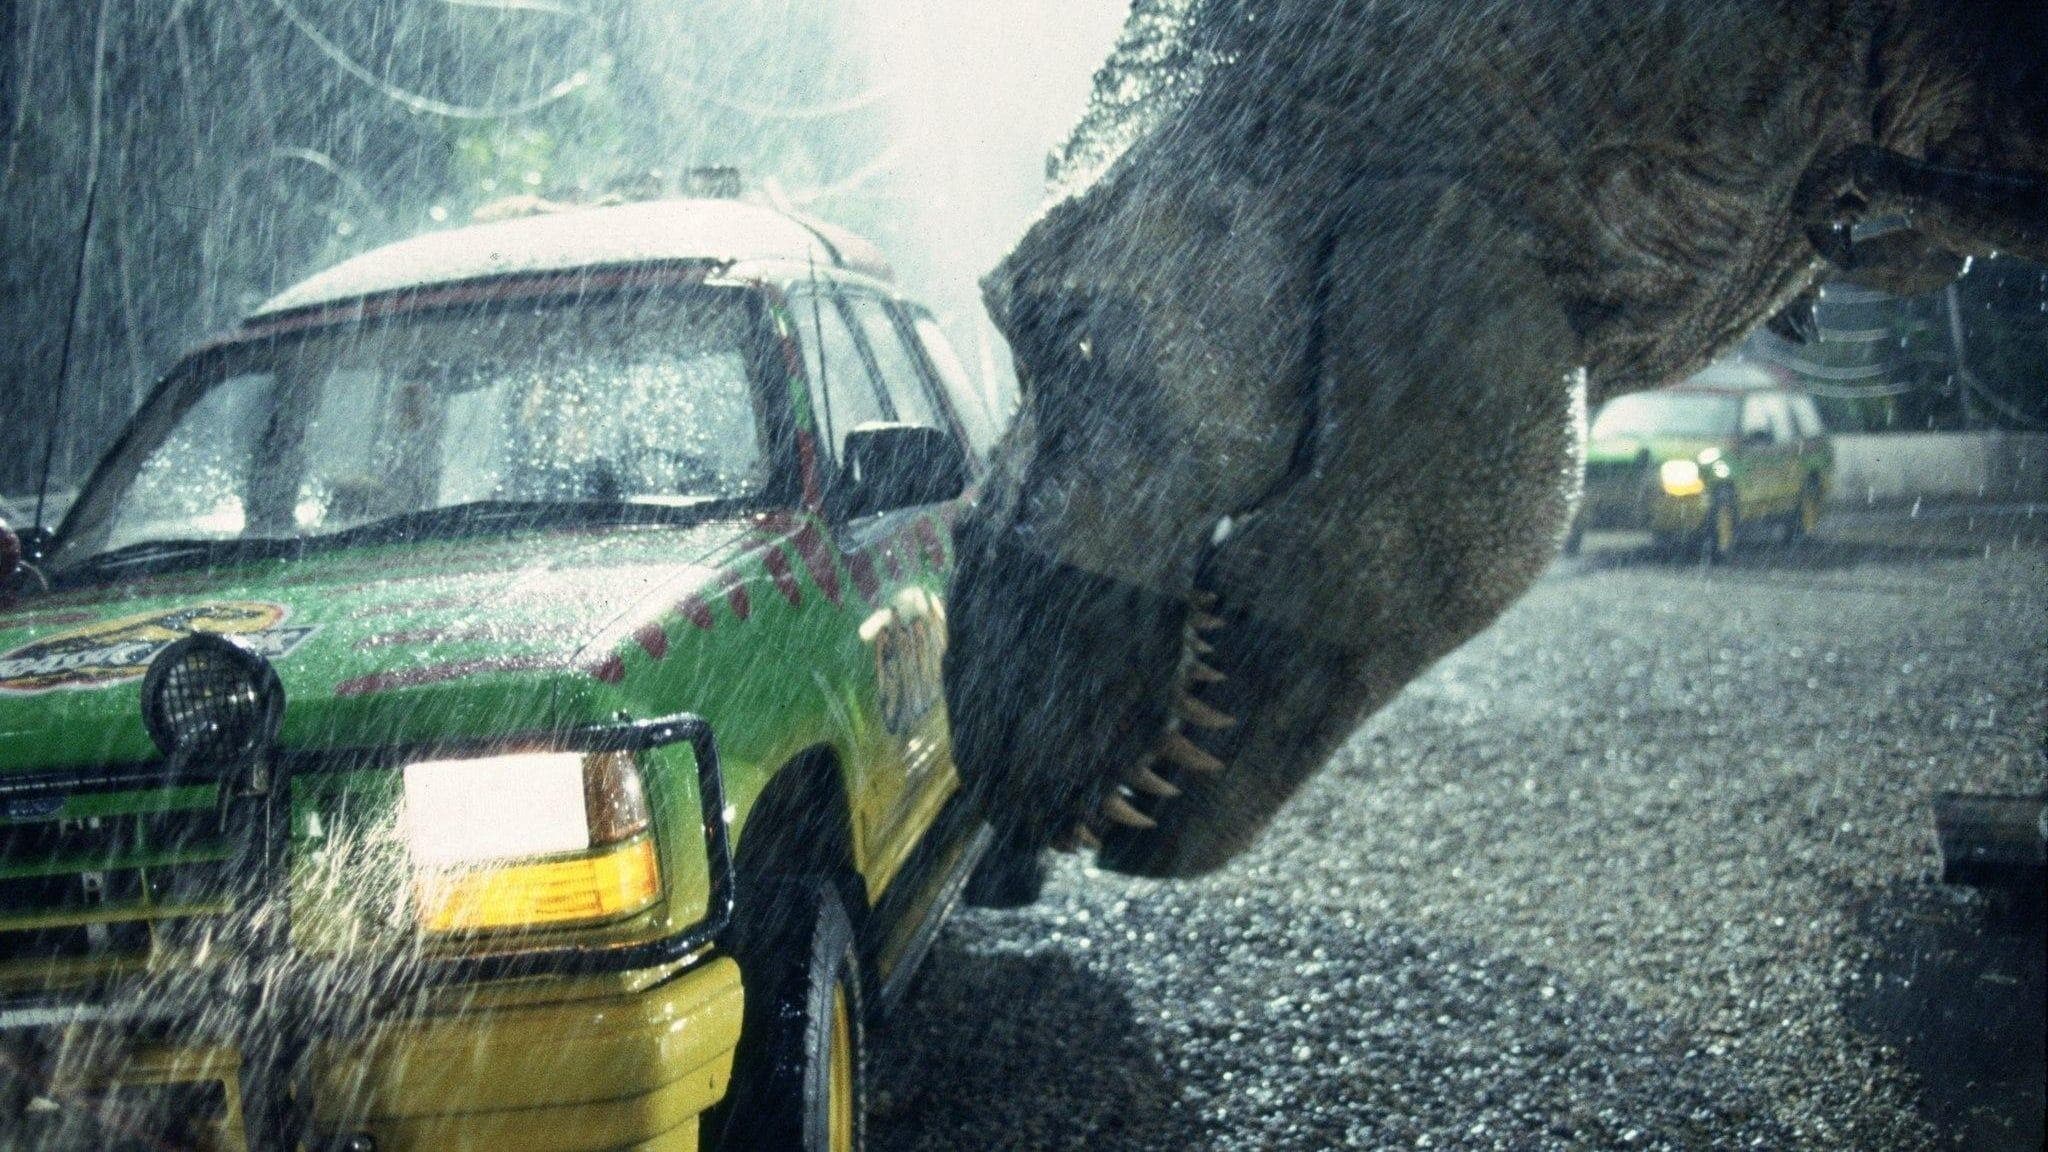 Random Things You Didn't Know About the Jurassic Park Franchise